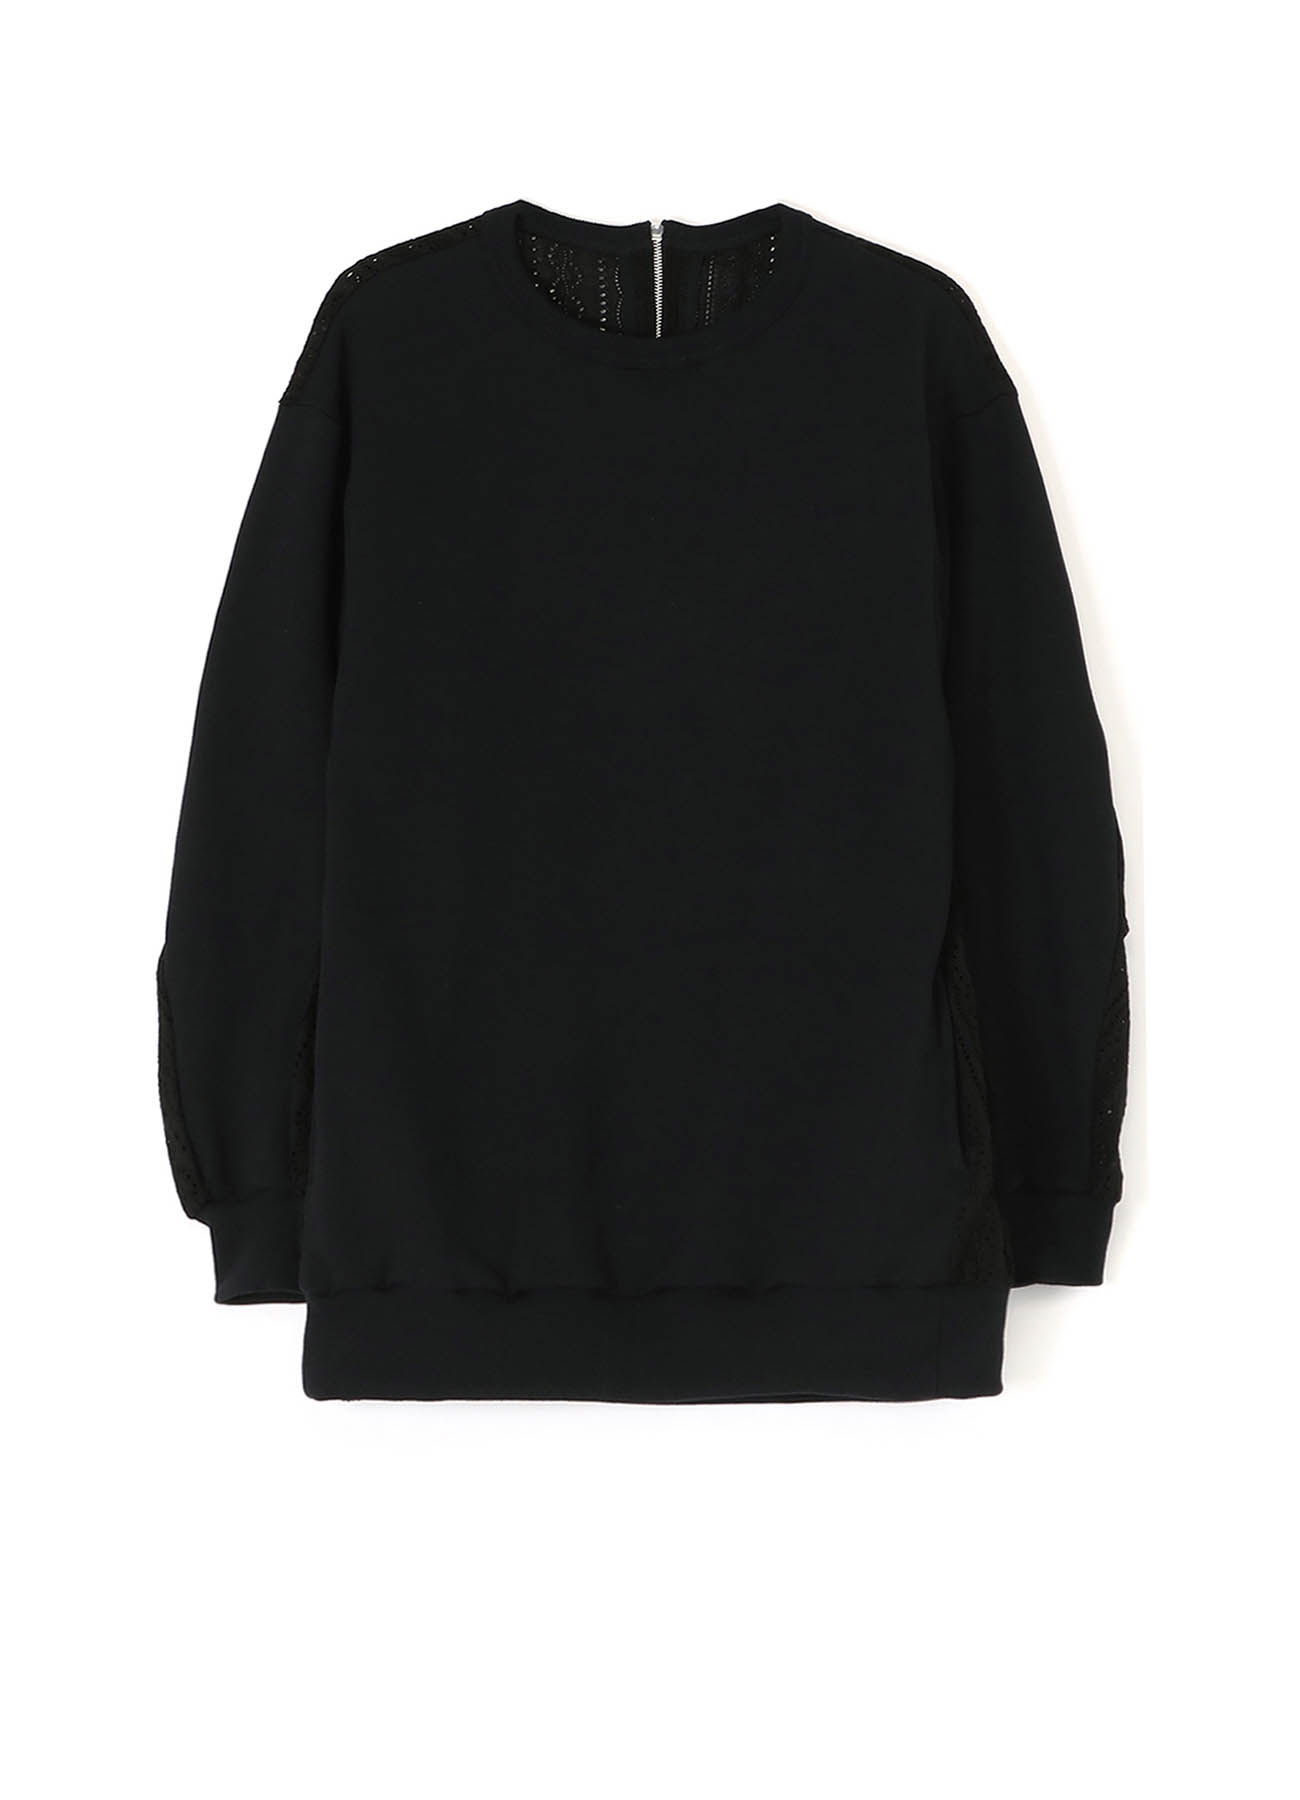 REGULATION PULLOVER WITH BACK ZIPPER